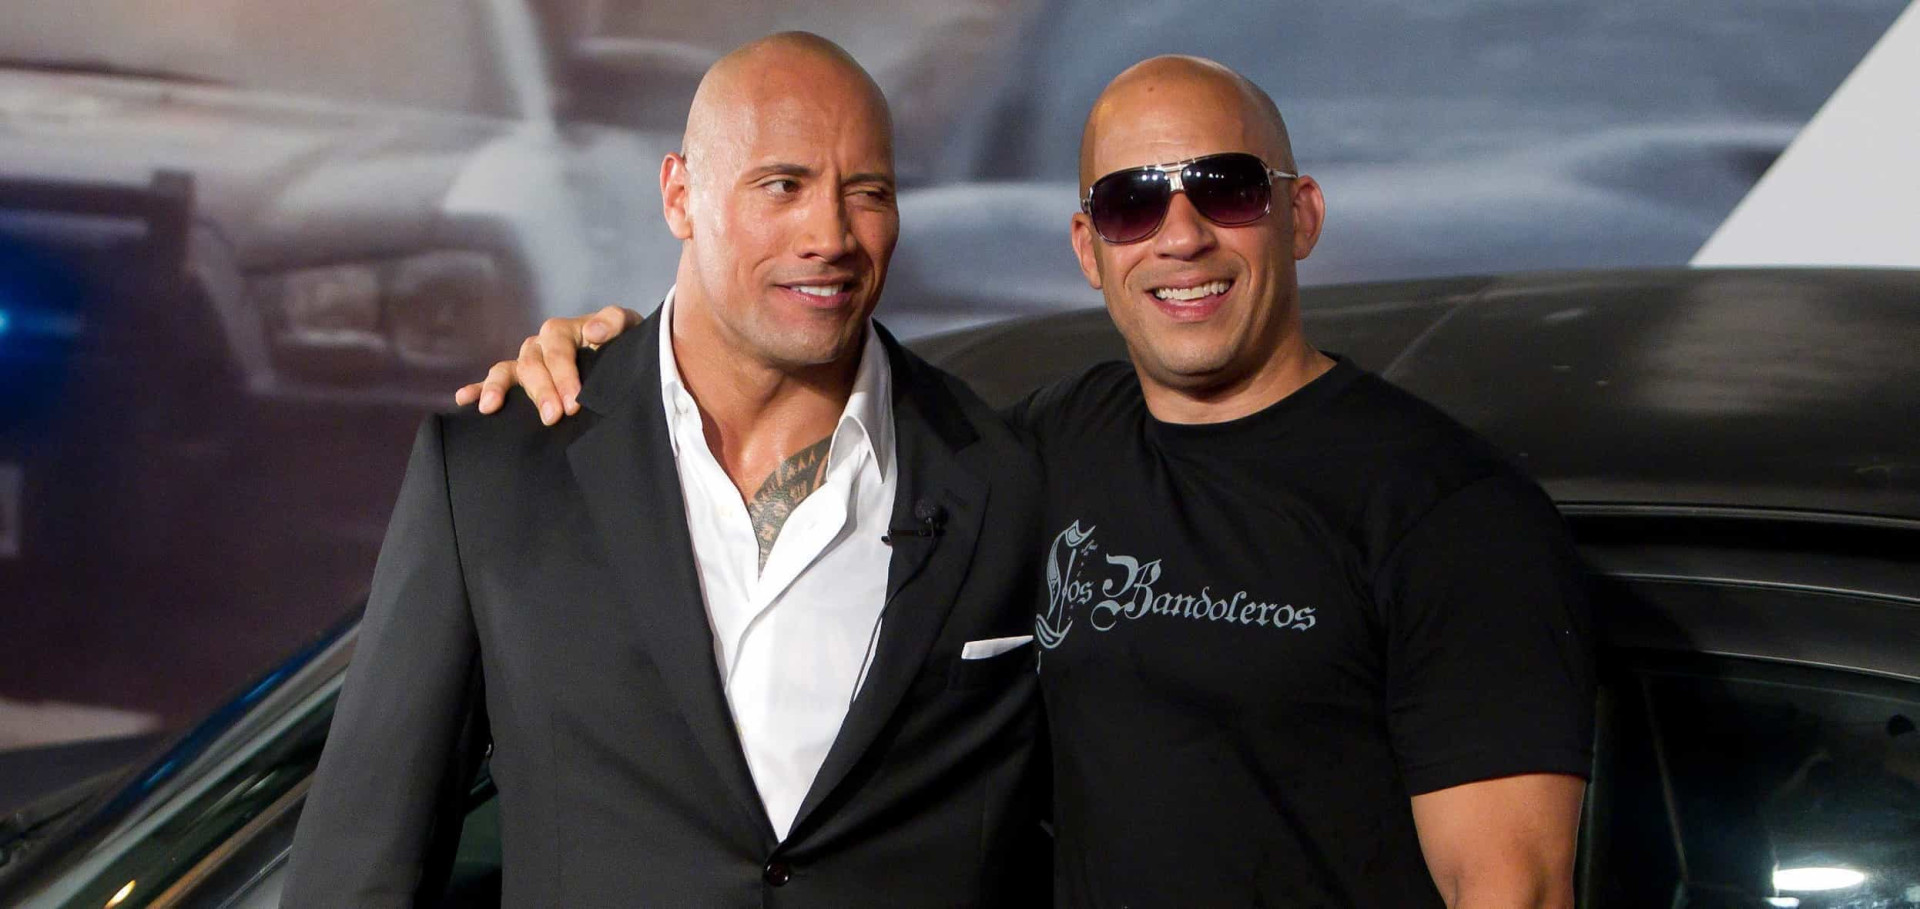 <p>Vin Diesel and Dwayne Johnson's feud began during the production of 'The Fate of the Furious' in 2017. Diesel took to Instagram to criticize Johnson, claiming that the aggression between their characters on-screen was genuine. Since then, the two actors have not collaborated and have made disparaging remarks about each other in interviews, indicating a strained relationship. However, in November 2021, Diesel publicly reached out to Johnson, imploring him to return for the series' final film. In an open letter, he appealed to their previous camaraderie, referring to Johnson as his "little brother" and reminding him of the bonds they share with each other's families. Diesel also revealed that he had promised his late co-star and friend, Paul Walker, that he would give the franchise a satisfying conclusion. </p><p>You may also like:<a href="https://www.starsinsider.com/n/451104?utm_source=msn.com&utm_medium=display&utm_campaign=referral_description&utm_content=570915en-en"> Fascinating facts about Kensington Palace and its royal residents</a></p>